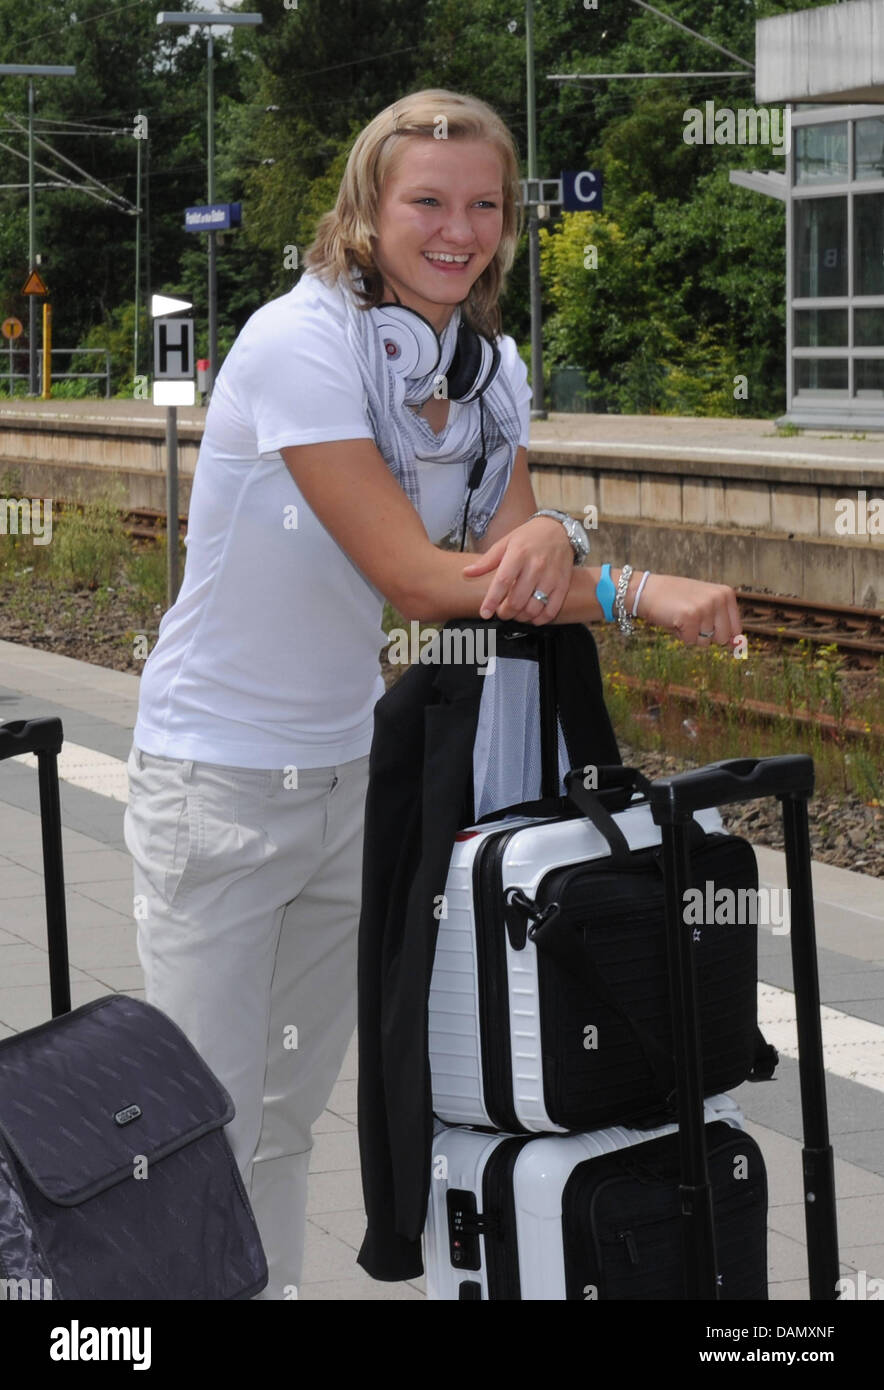 German women's national soccer player Alexandra Popp waits for the ICE train from Frankfurt to Duesseldorf at the station in Frankfurt am Main, Germany, 01 July 2011. Germany's next FIFA Women's World Cup match will take place in Moenchengladbach on 5 July 2011. Photo: Markus Gilliar/GES-Sportfoto/DFB Stock Photo